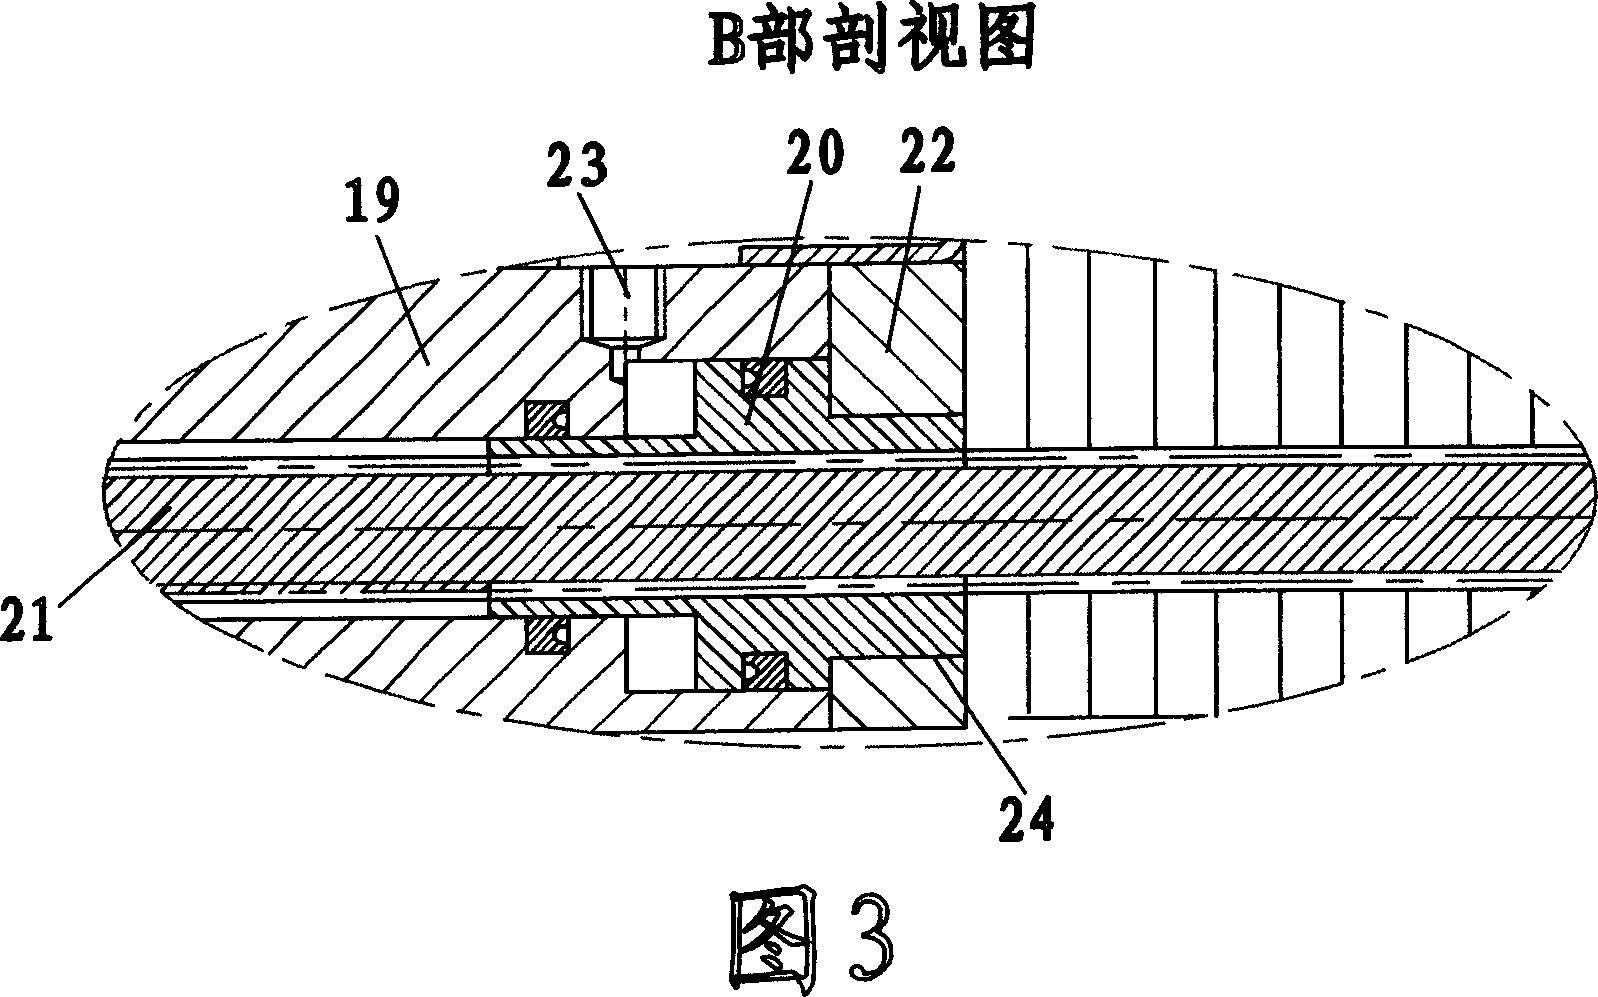 Knife tool arc edging device